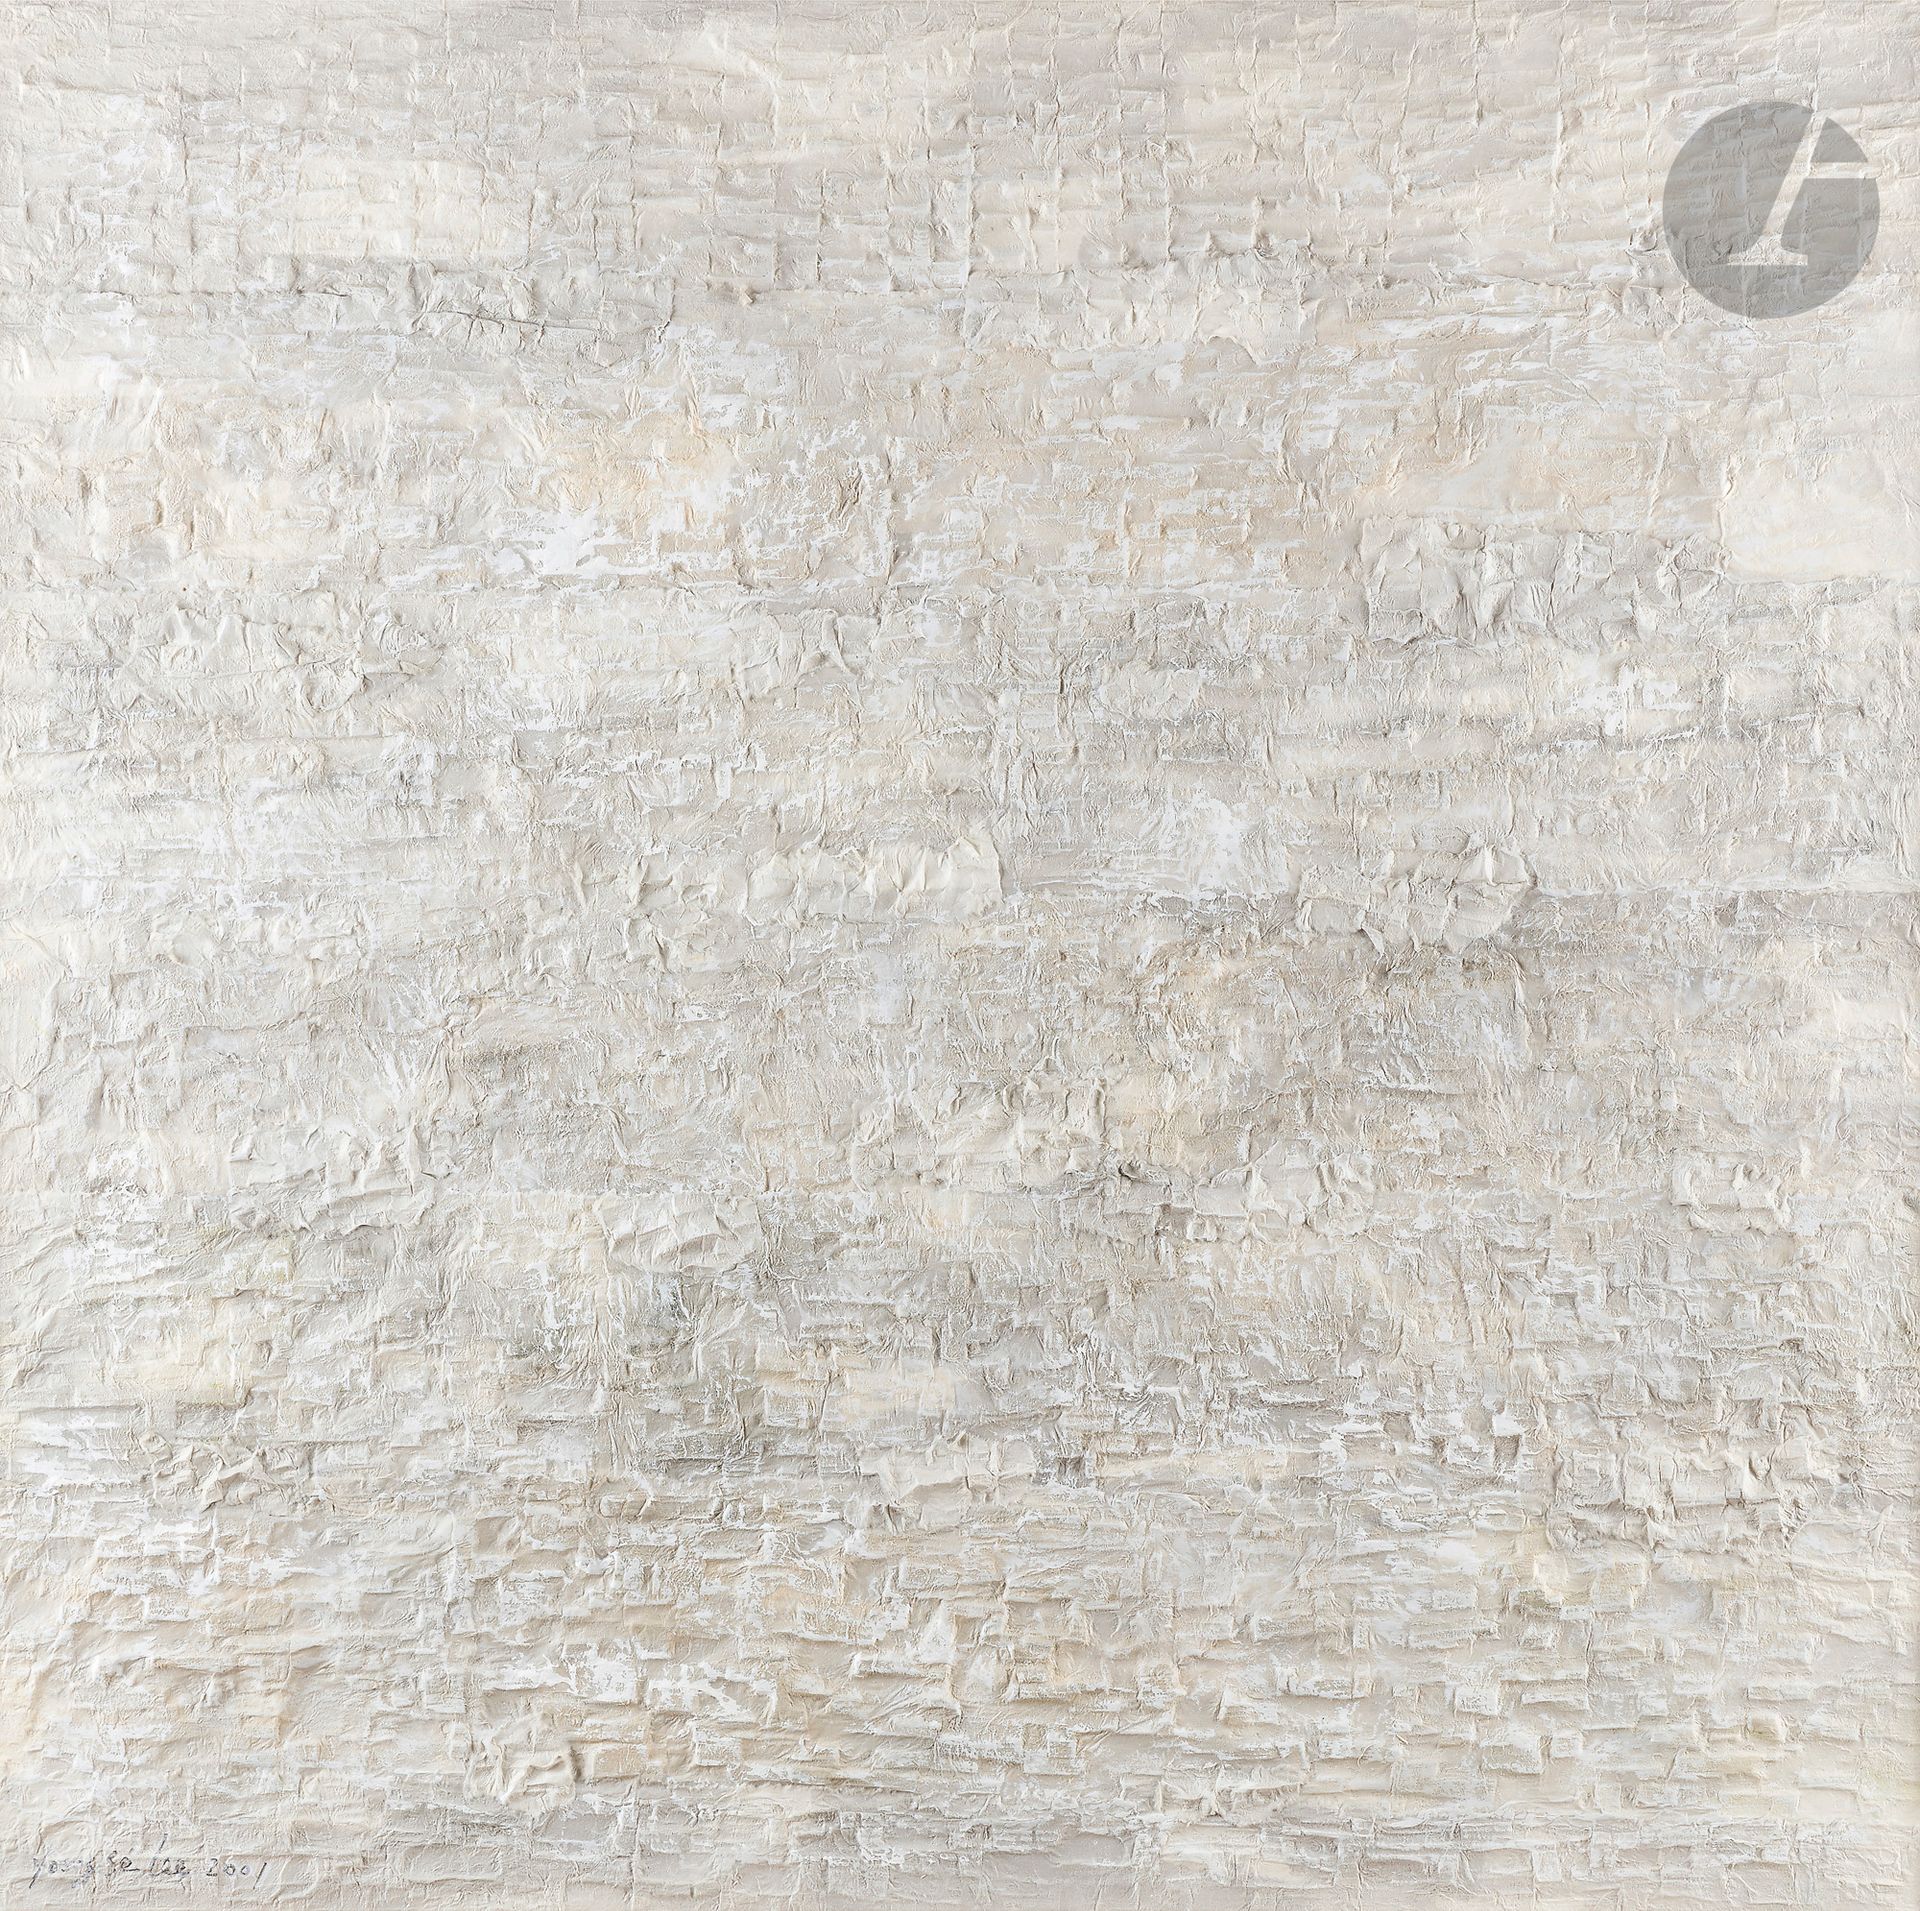 Null LEE Young-Sé [Korean] (b. 1956)
Void, 2001
Mixed media on embossed paper mo&hellip;